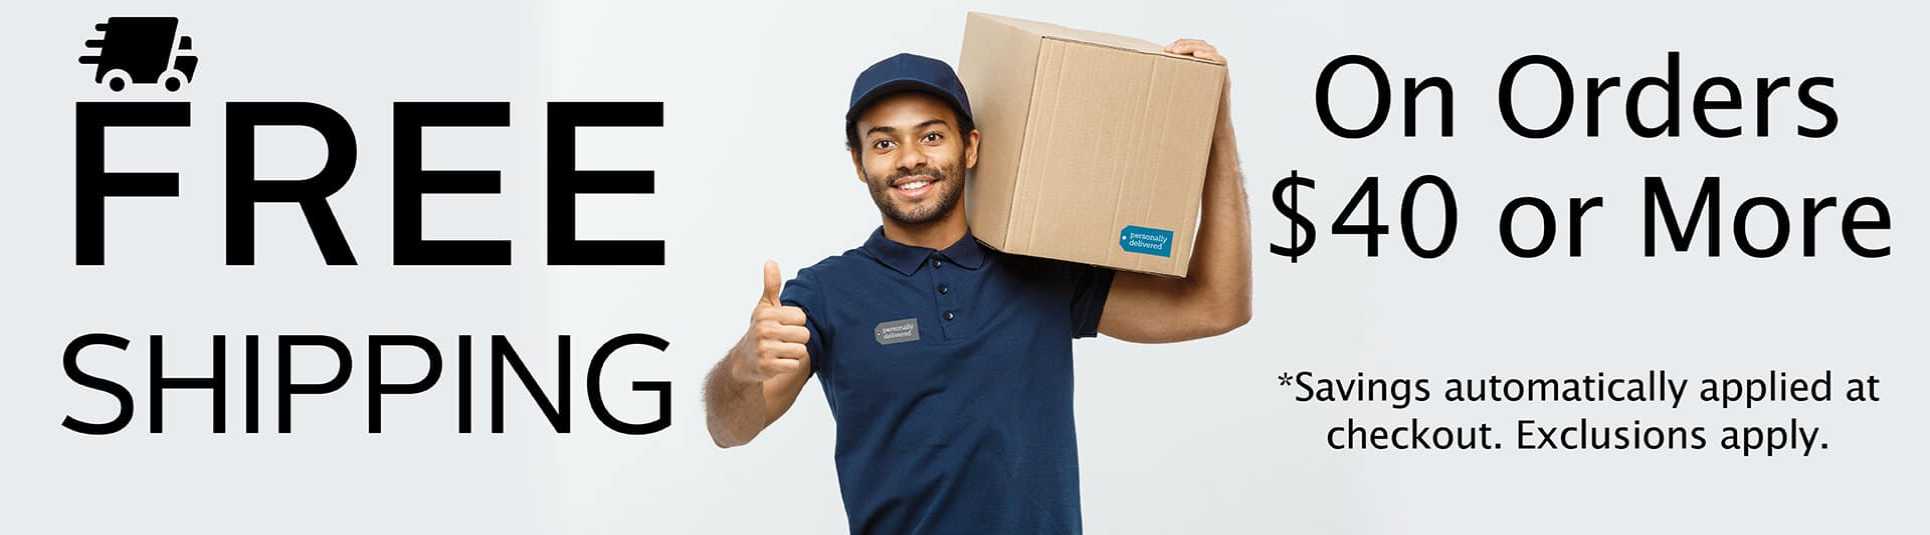 delivery man carrying a personally delivered plain brown box